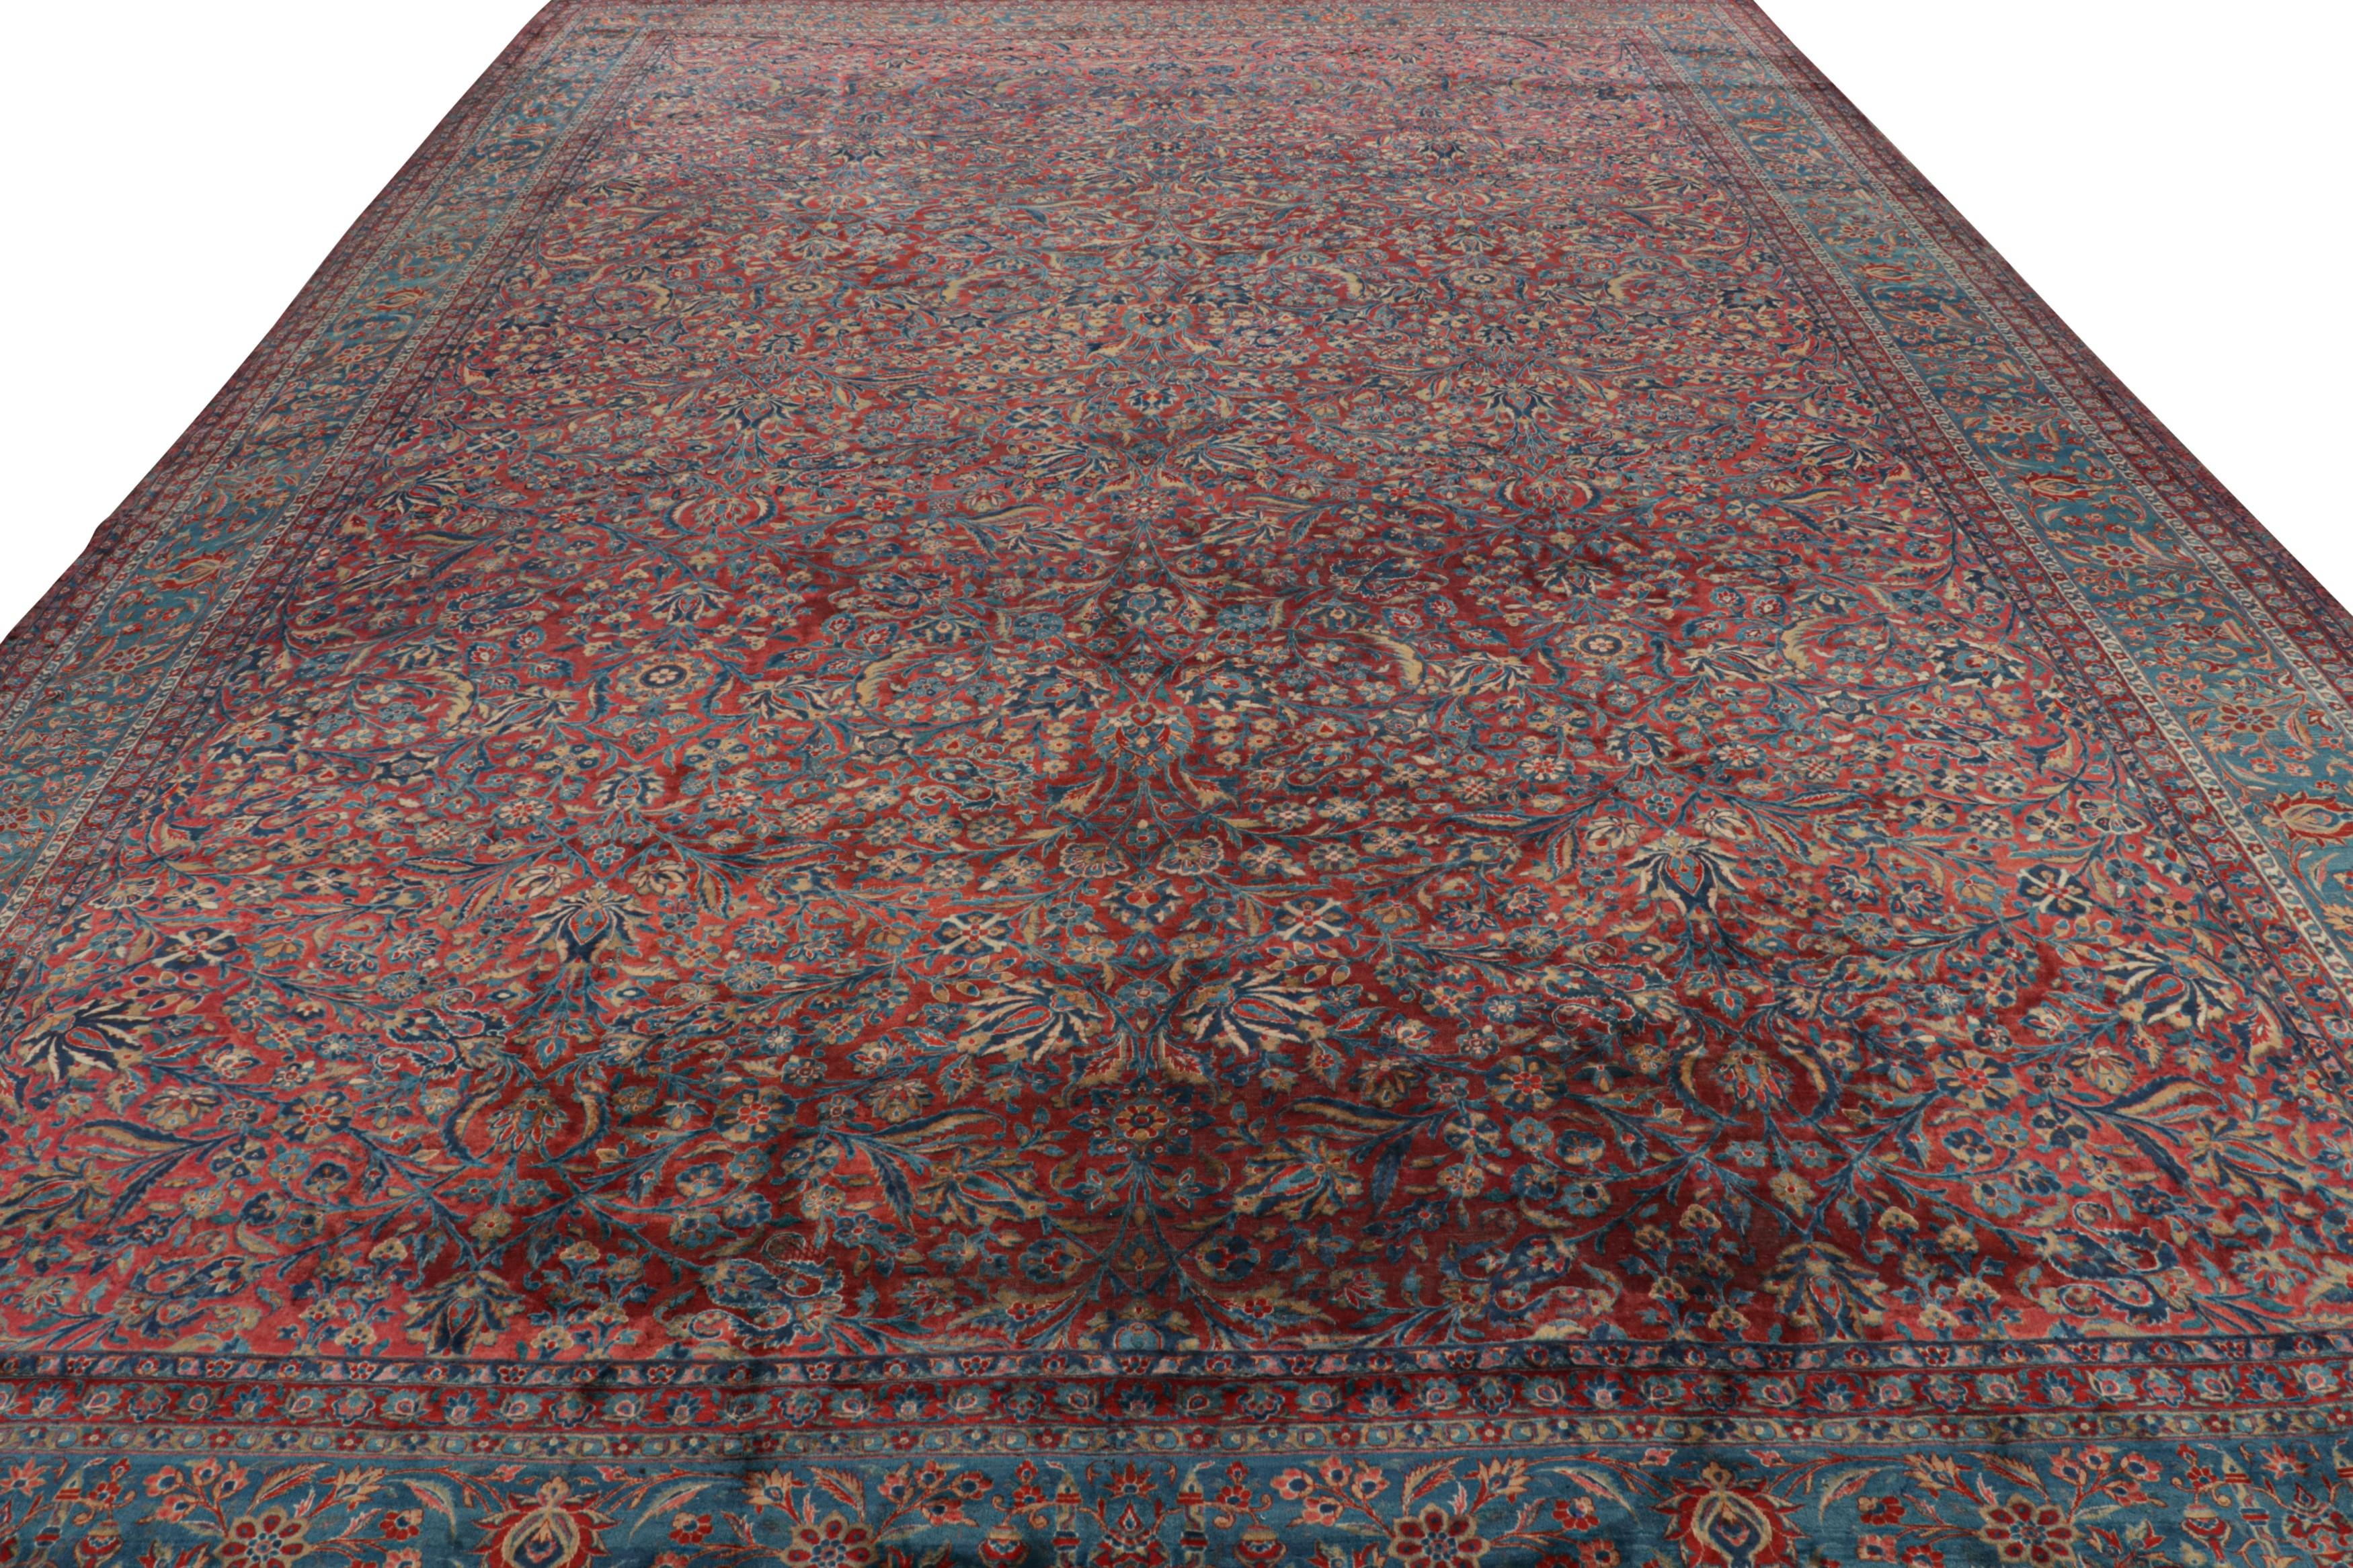 Hand-Knotted Antique Persian Kashan Rug with Red-Blue Floral Patterns by Rug & Kilim For Sale